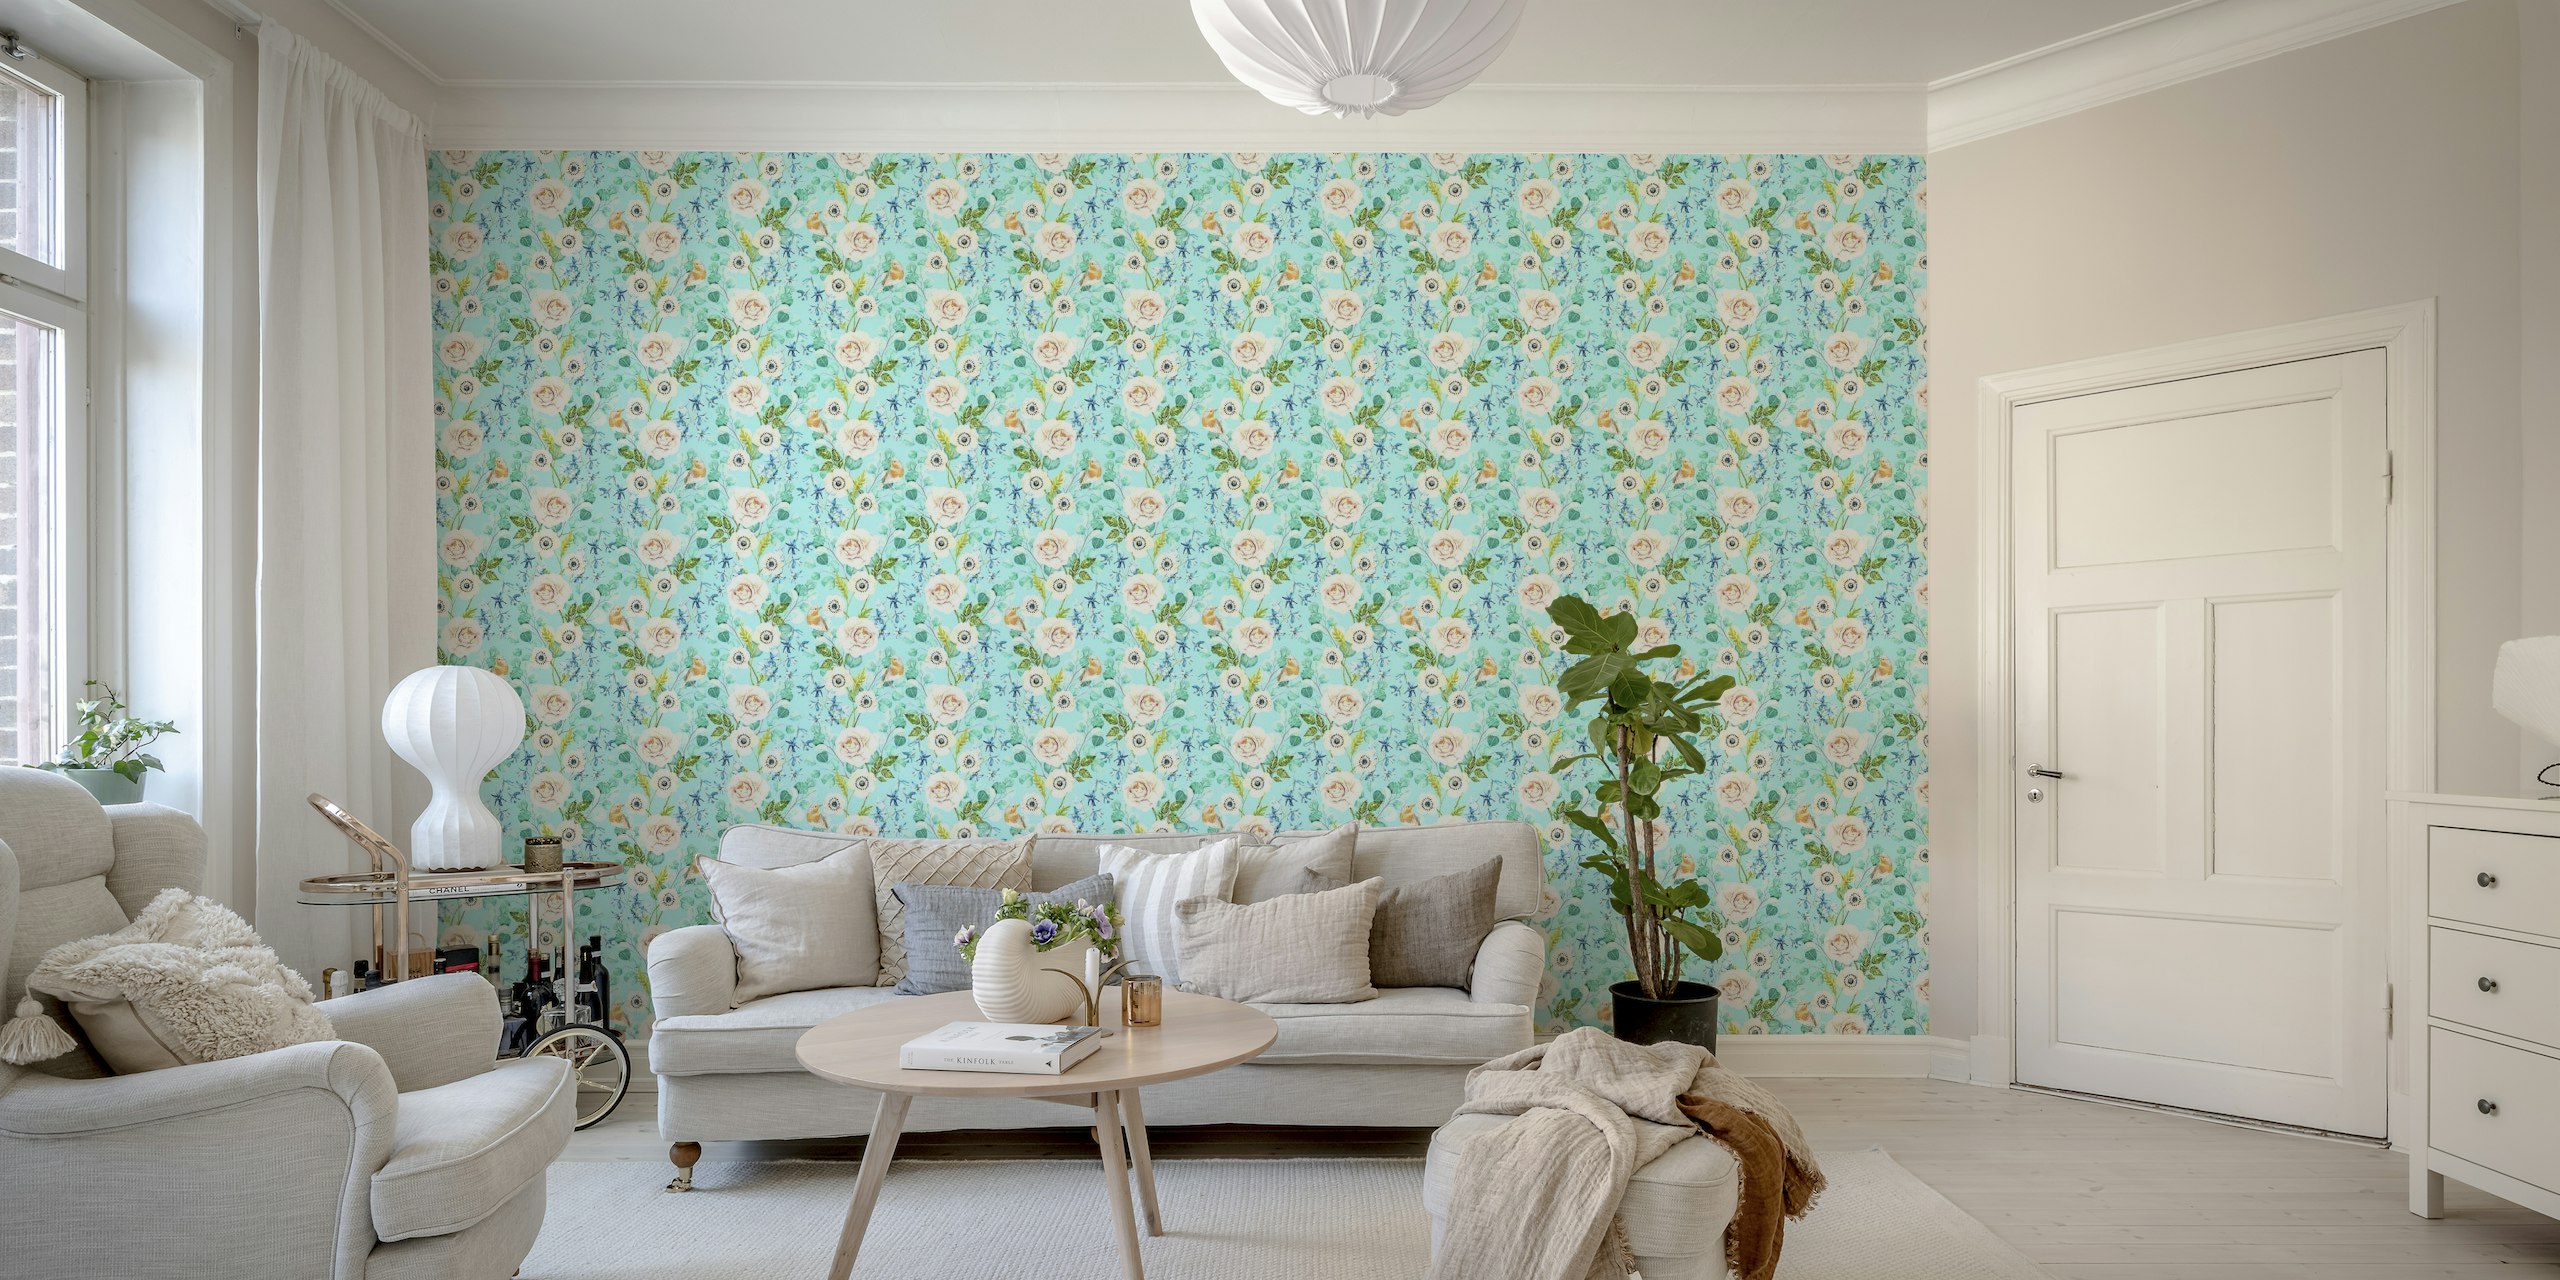 Handpainted flowers and birds on light blue tapete